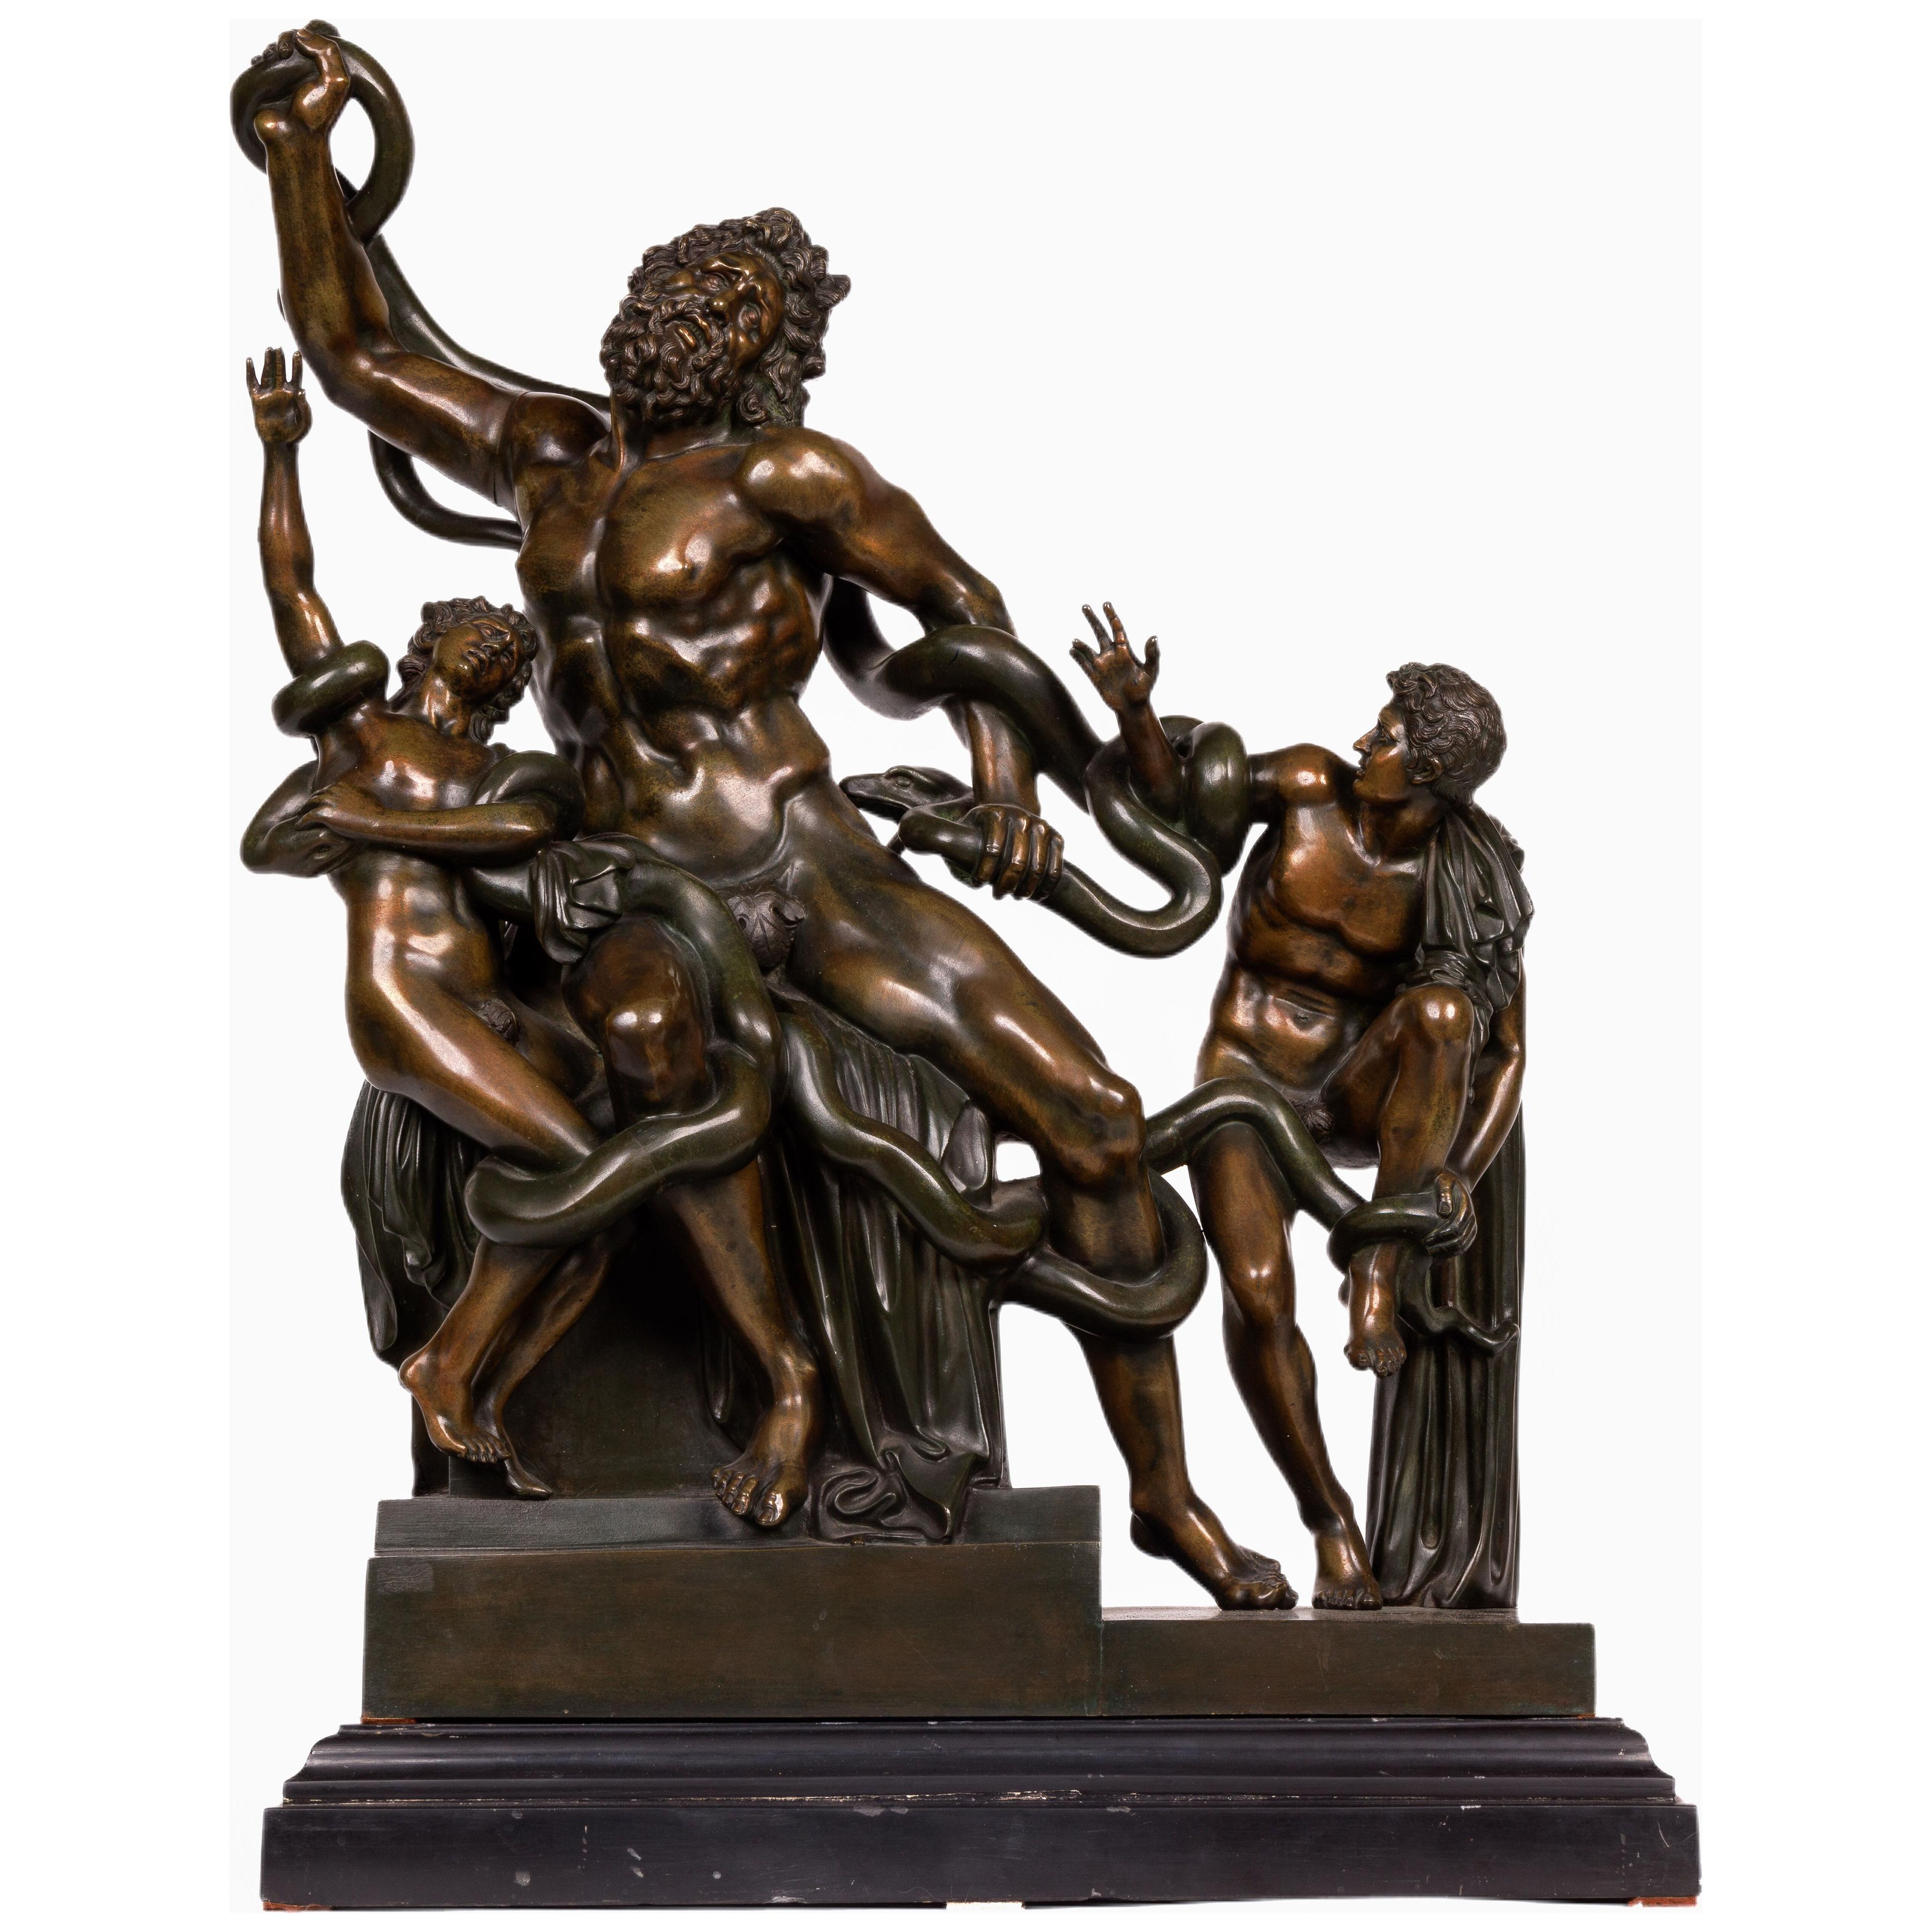 Italian Patinated Bronze Group Sculpture of Laocoon and His Sons, C. 1870